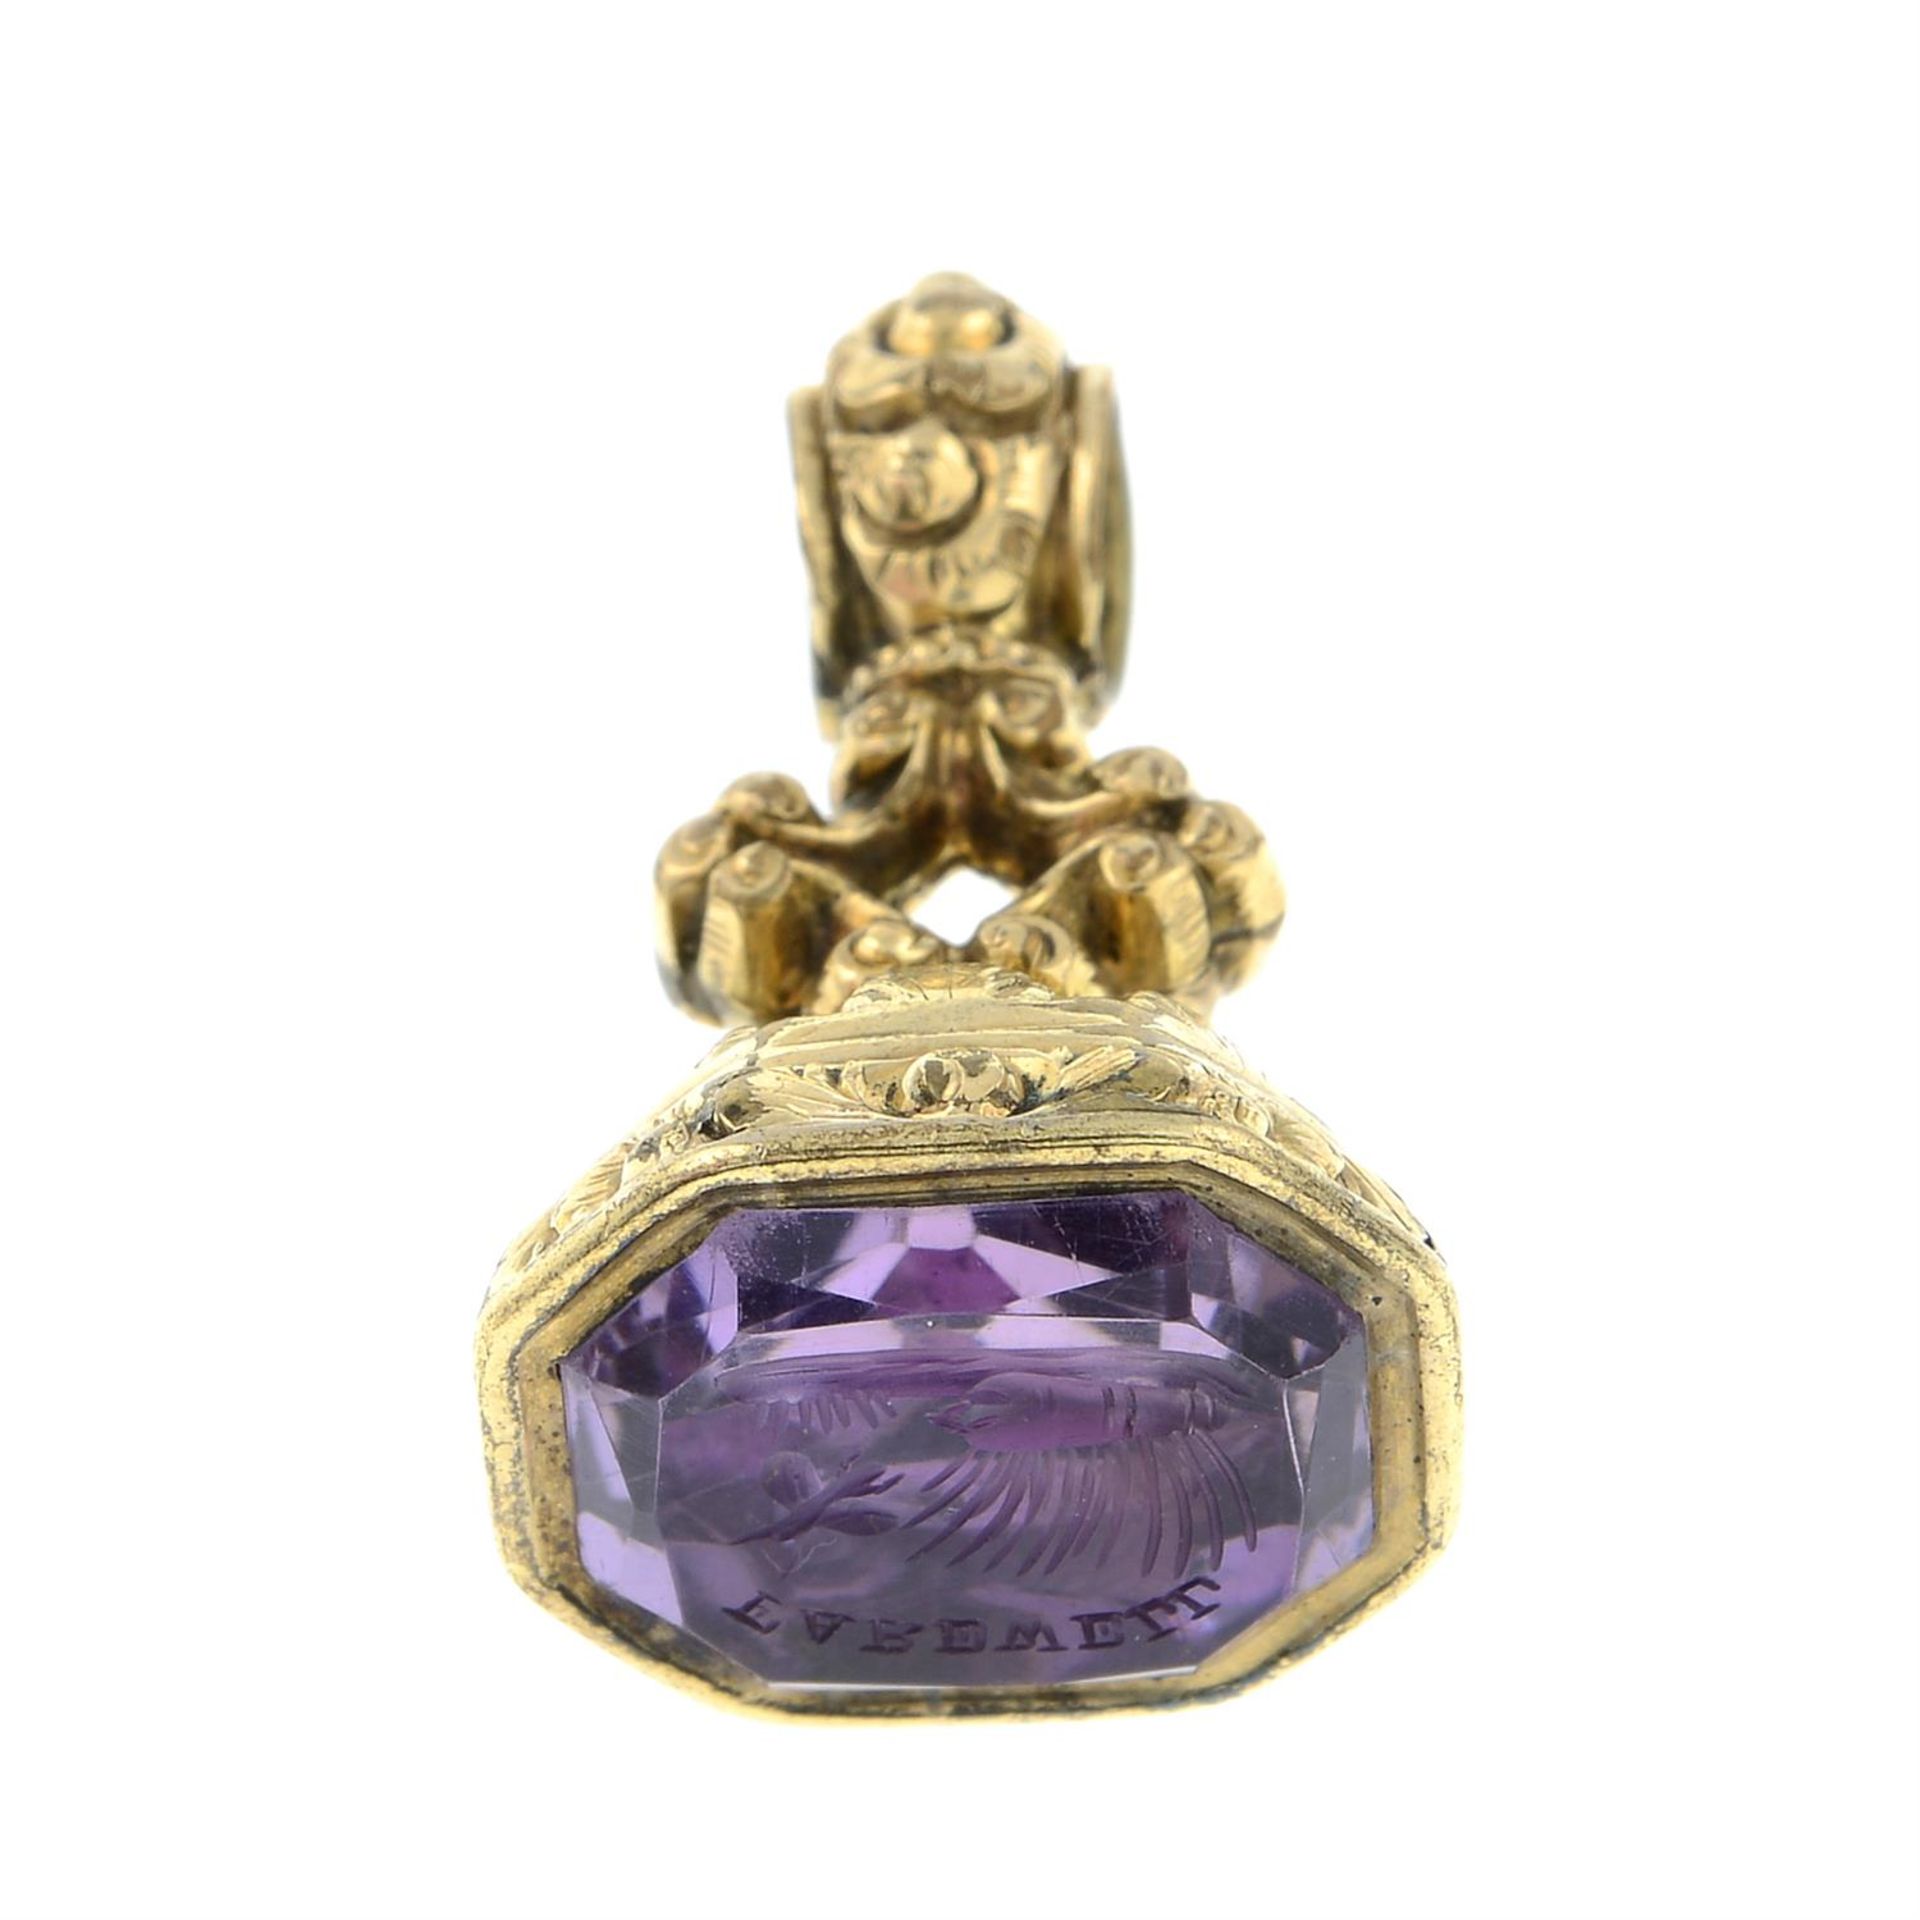 A mid 19th century amethyst intaglio fob seal, depicting a butterfly emerging from chrysalis,